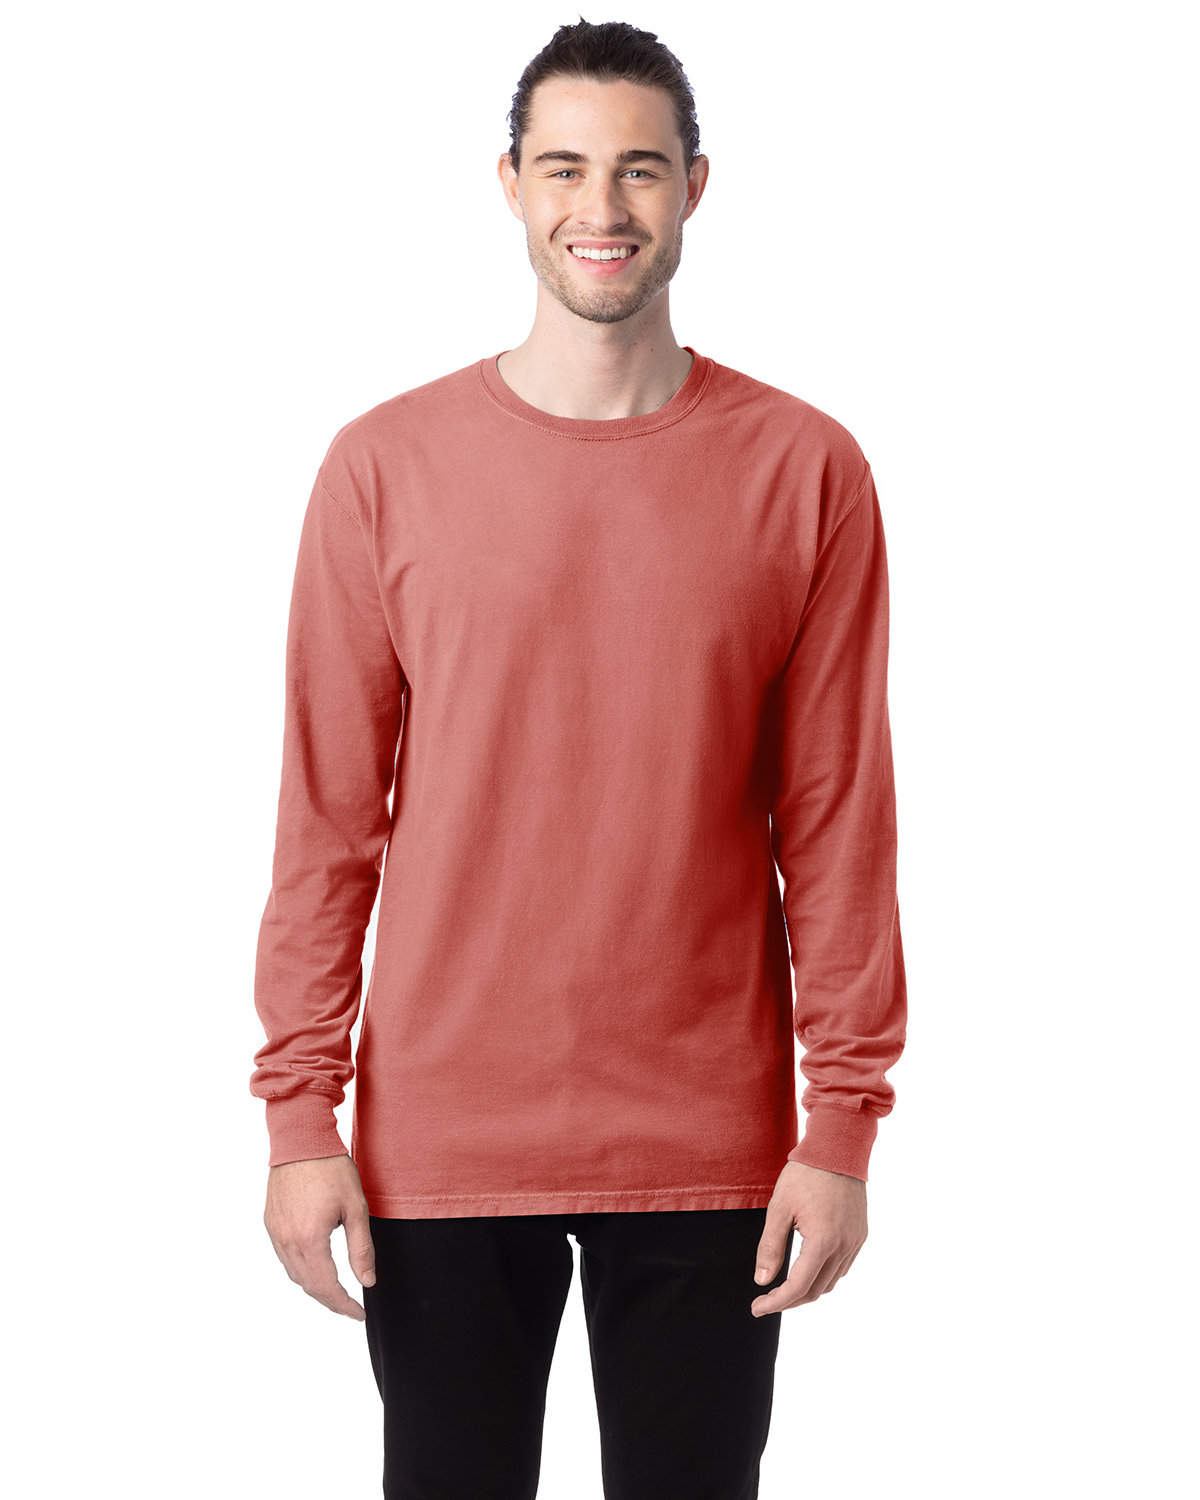 ComfortWash by Hanes Unisex Garment-Dyed Long-Sleeve T-Shirt NANTUCKET RED 